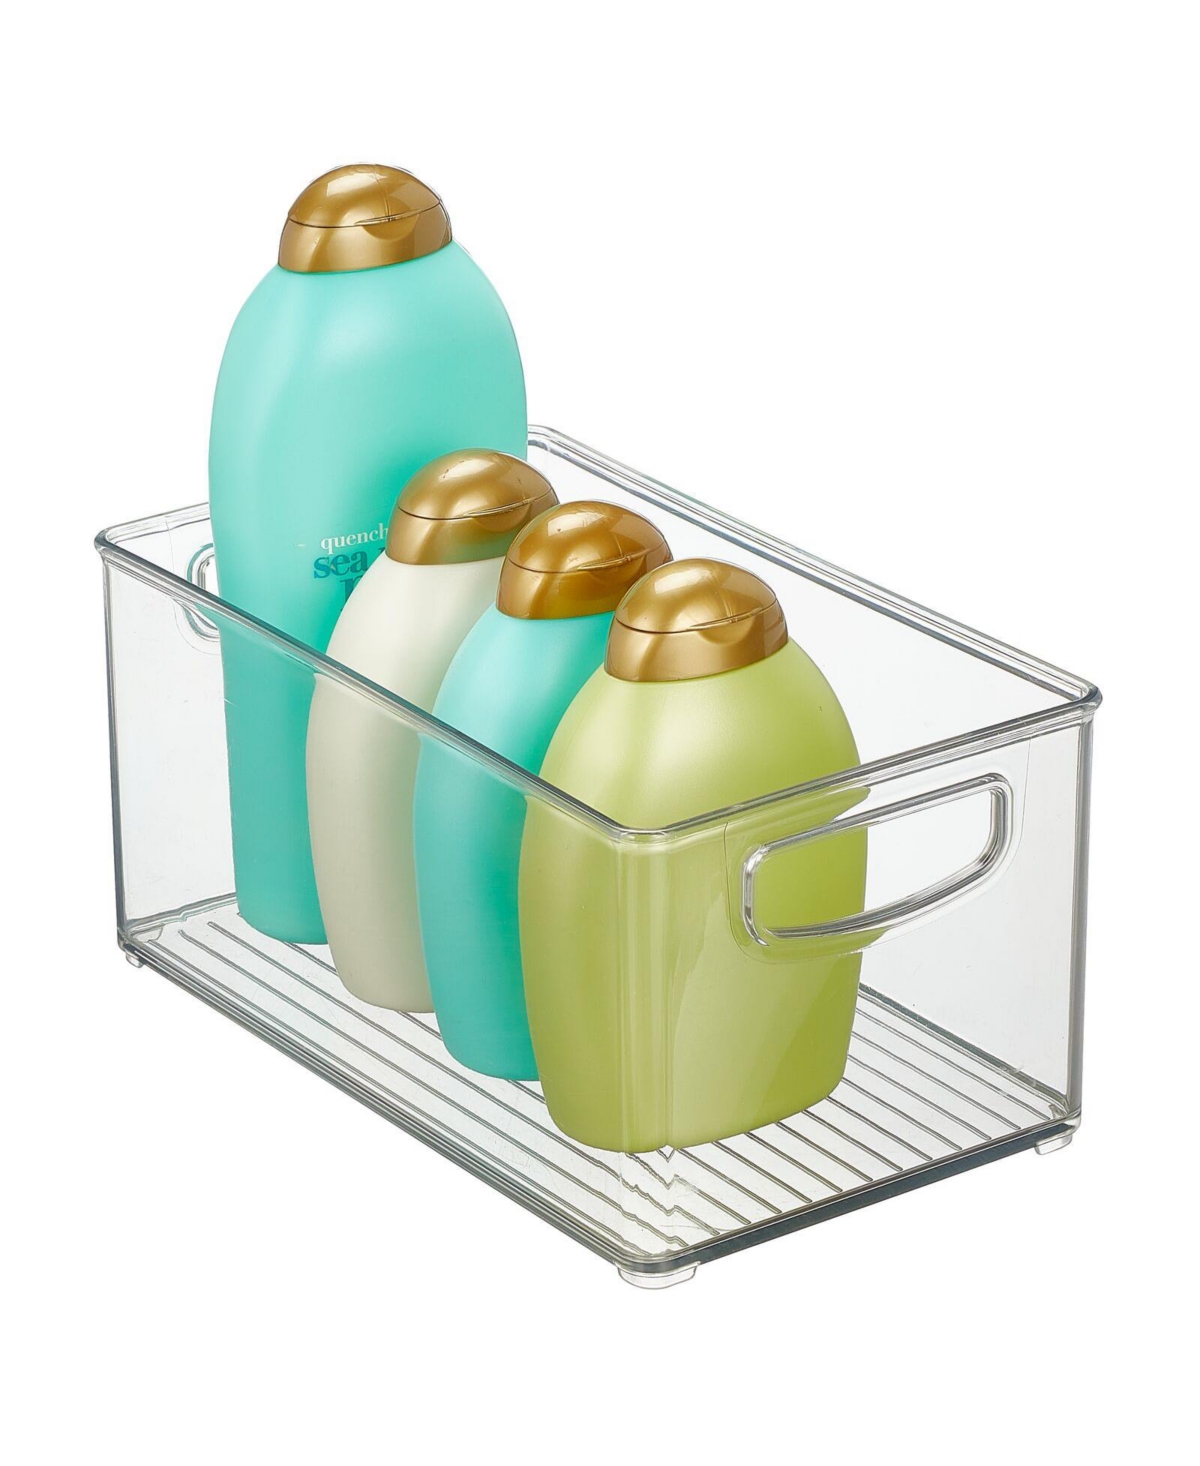 Plastic Bathroom Storage Container Bin with Handles - Clear